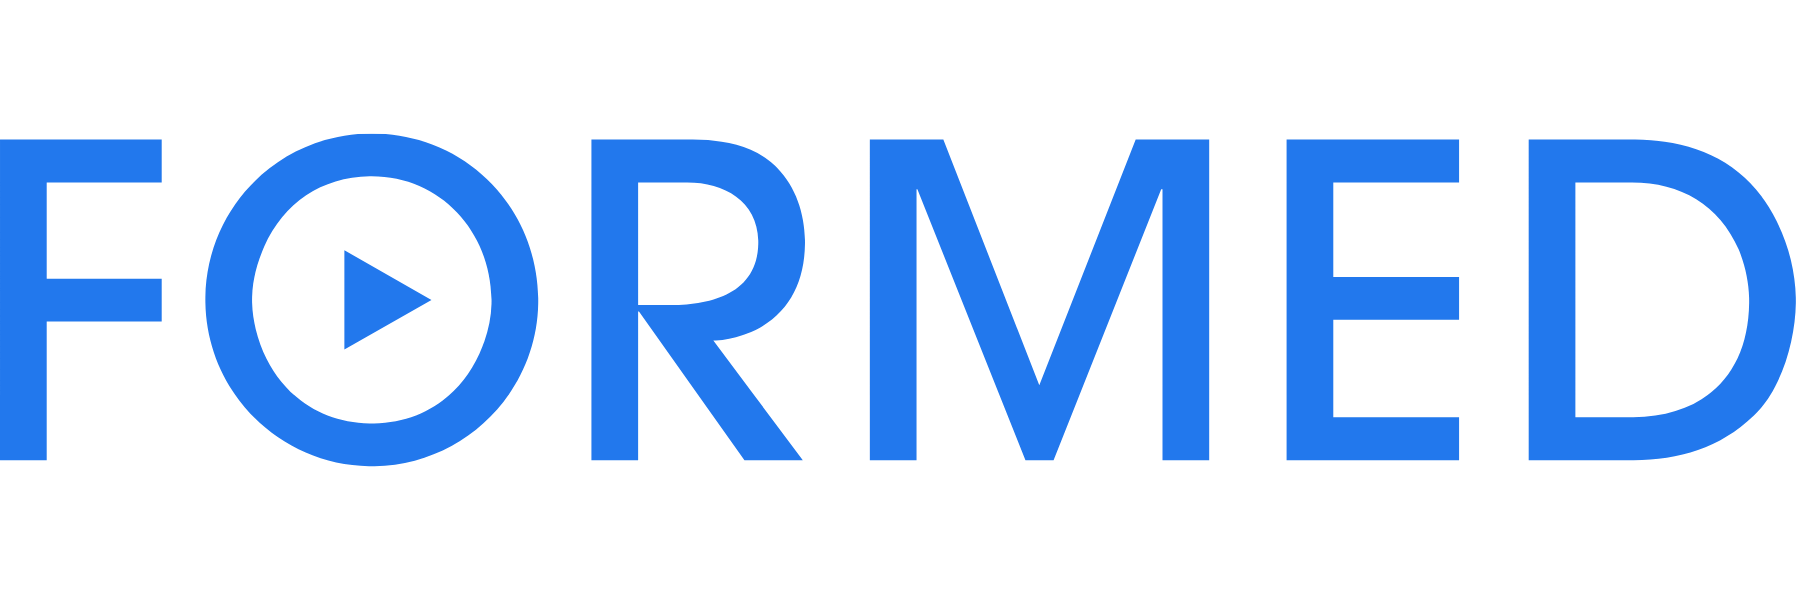 A blue formed logo on a white background